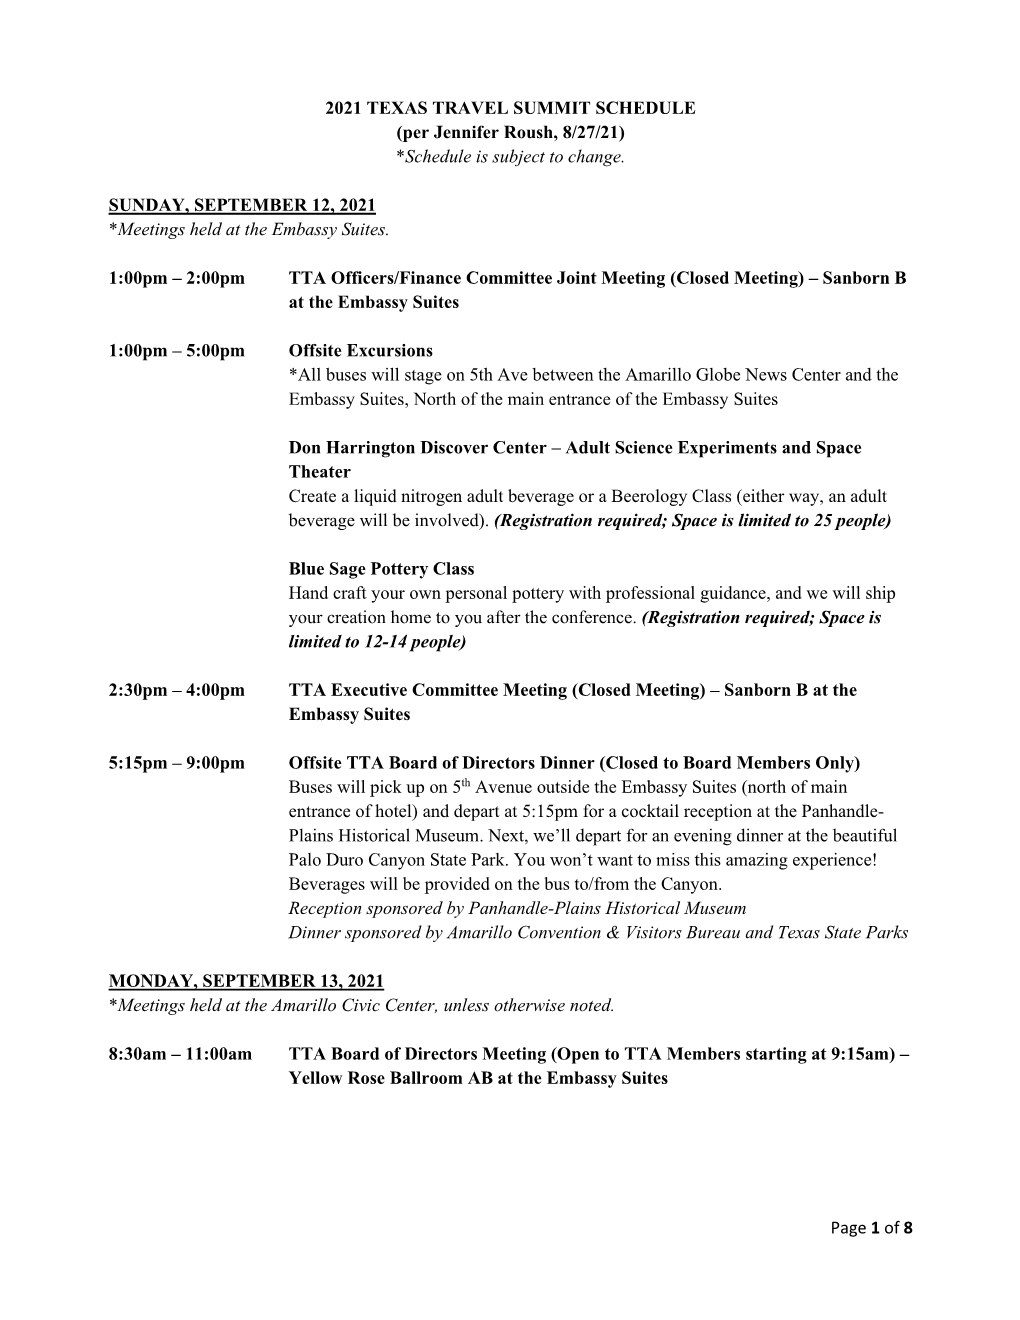 Page 1 of 8 2021 TEXAS TRAVEL SUMMIT SCHEDULE